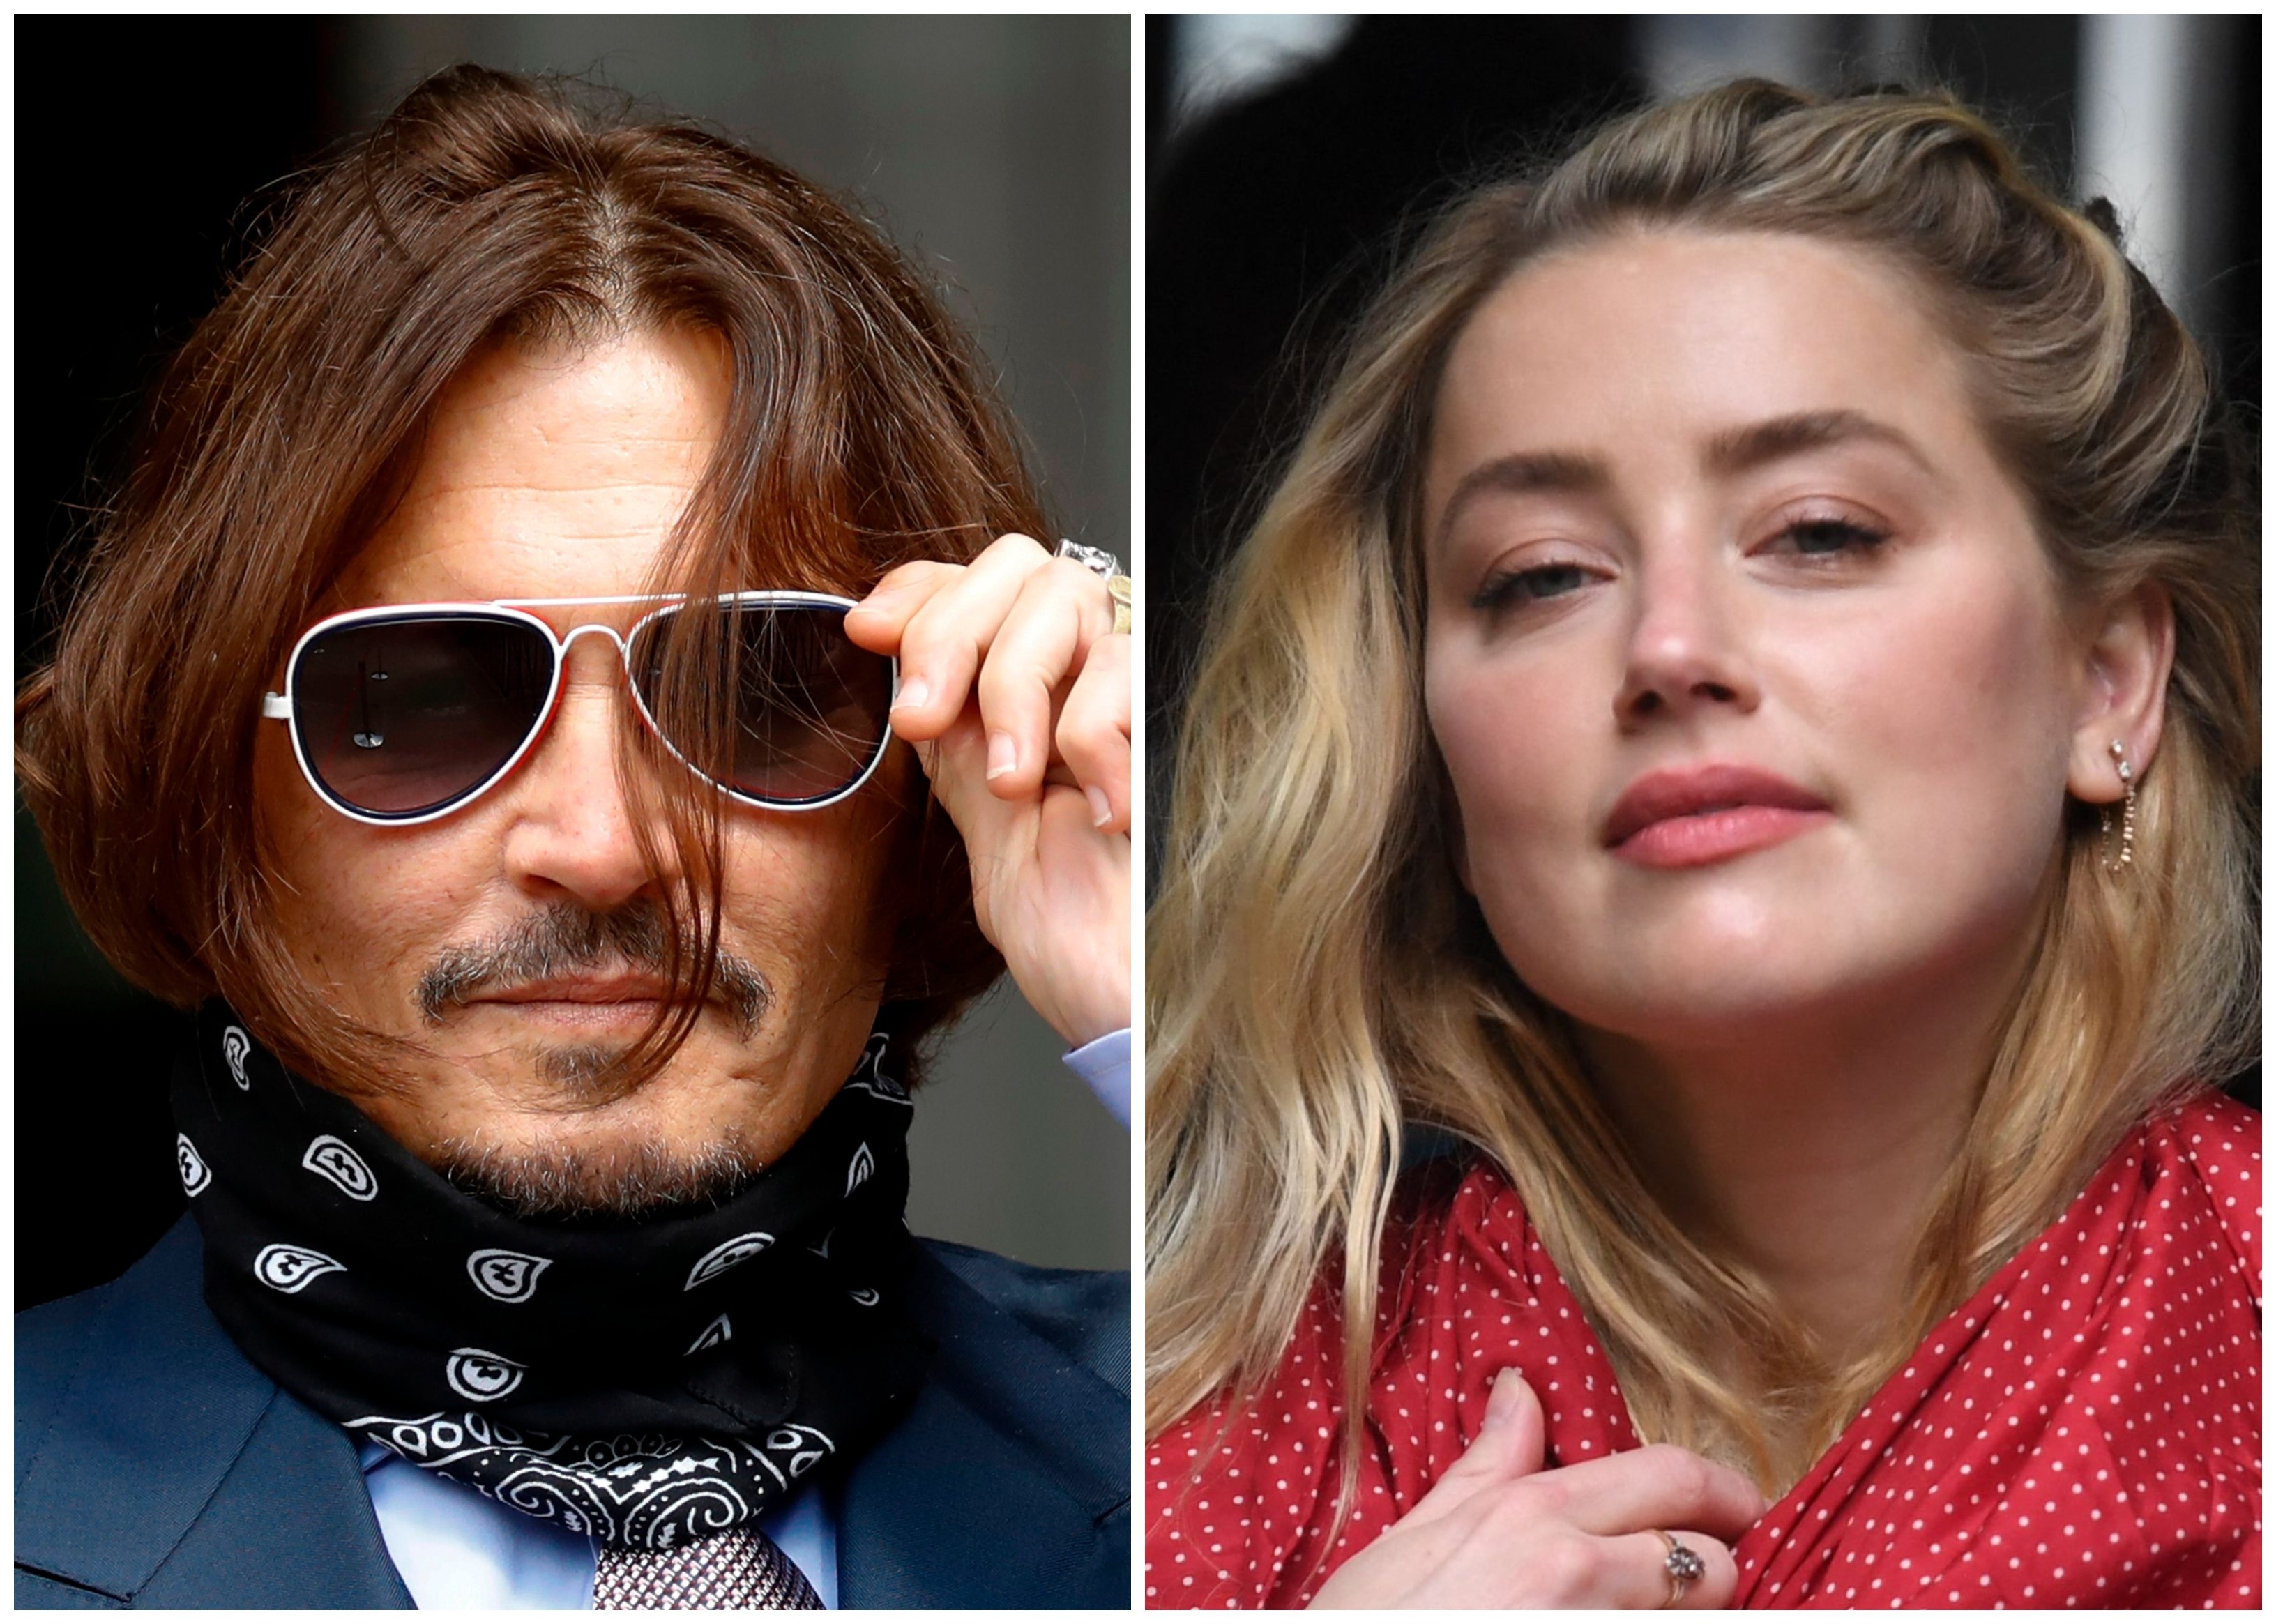 Johnny Depp vs Amber Heard ... the Hollywood divorce battle which shows no sign of winding down any time soon. Photos: AFP